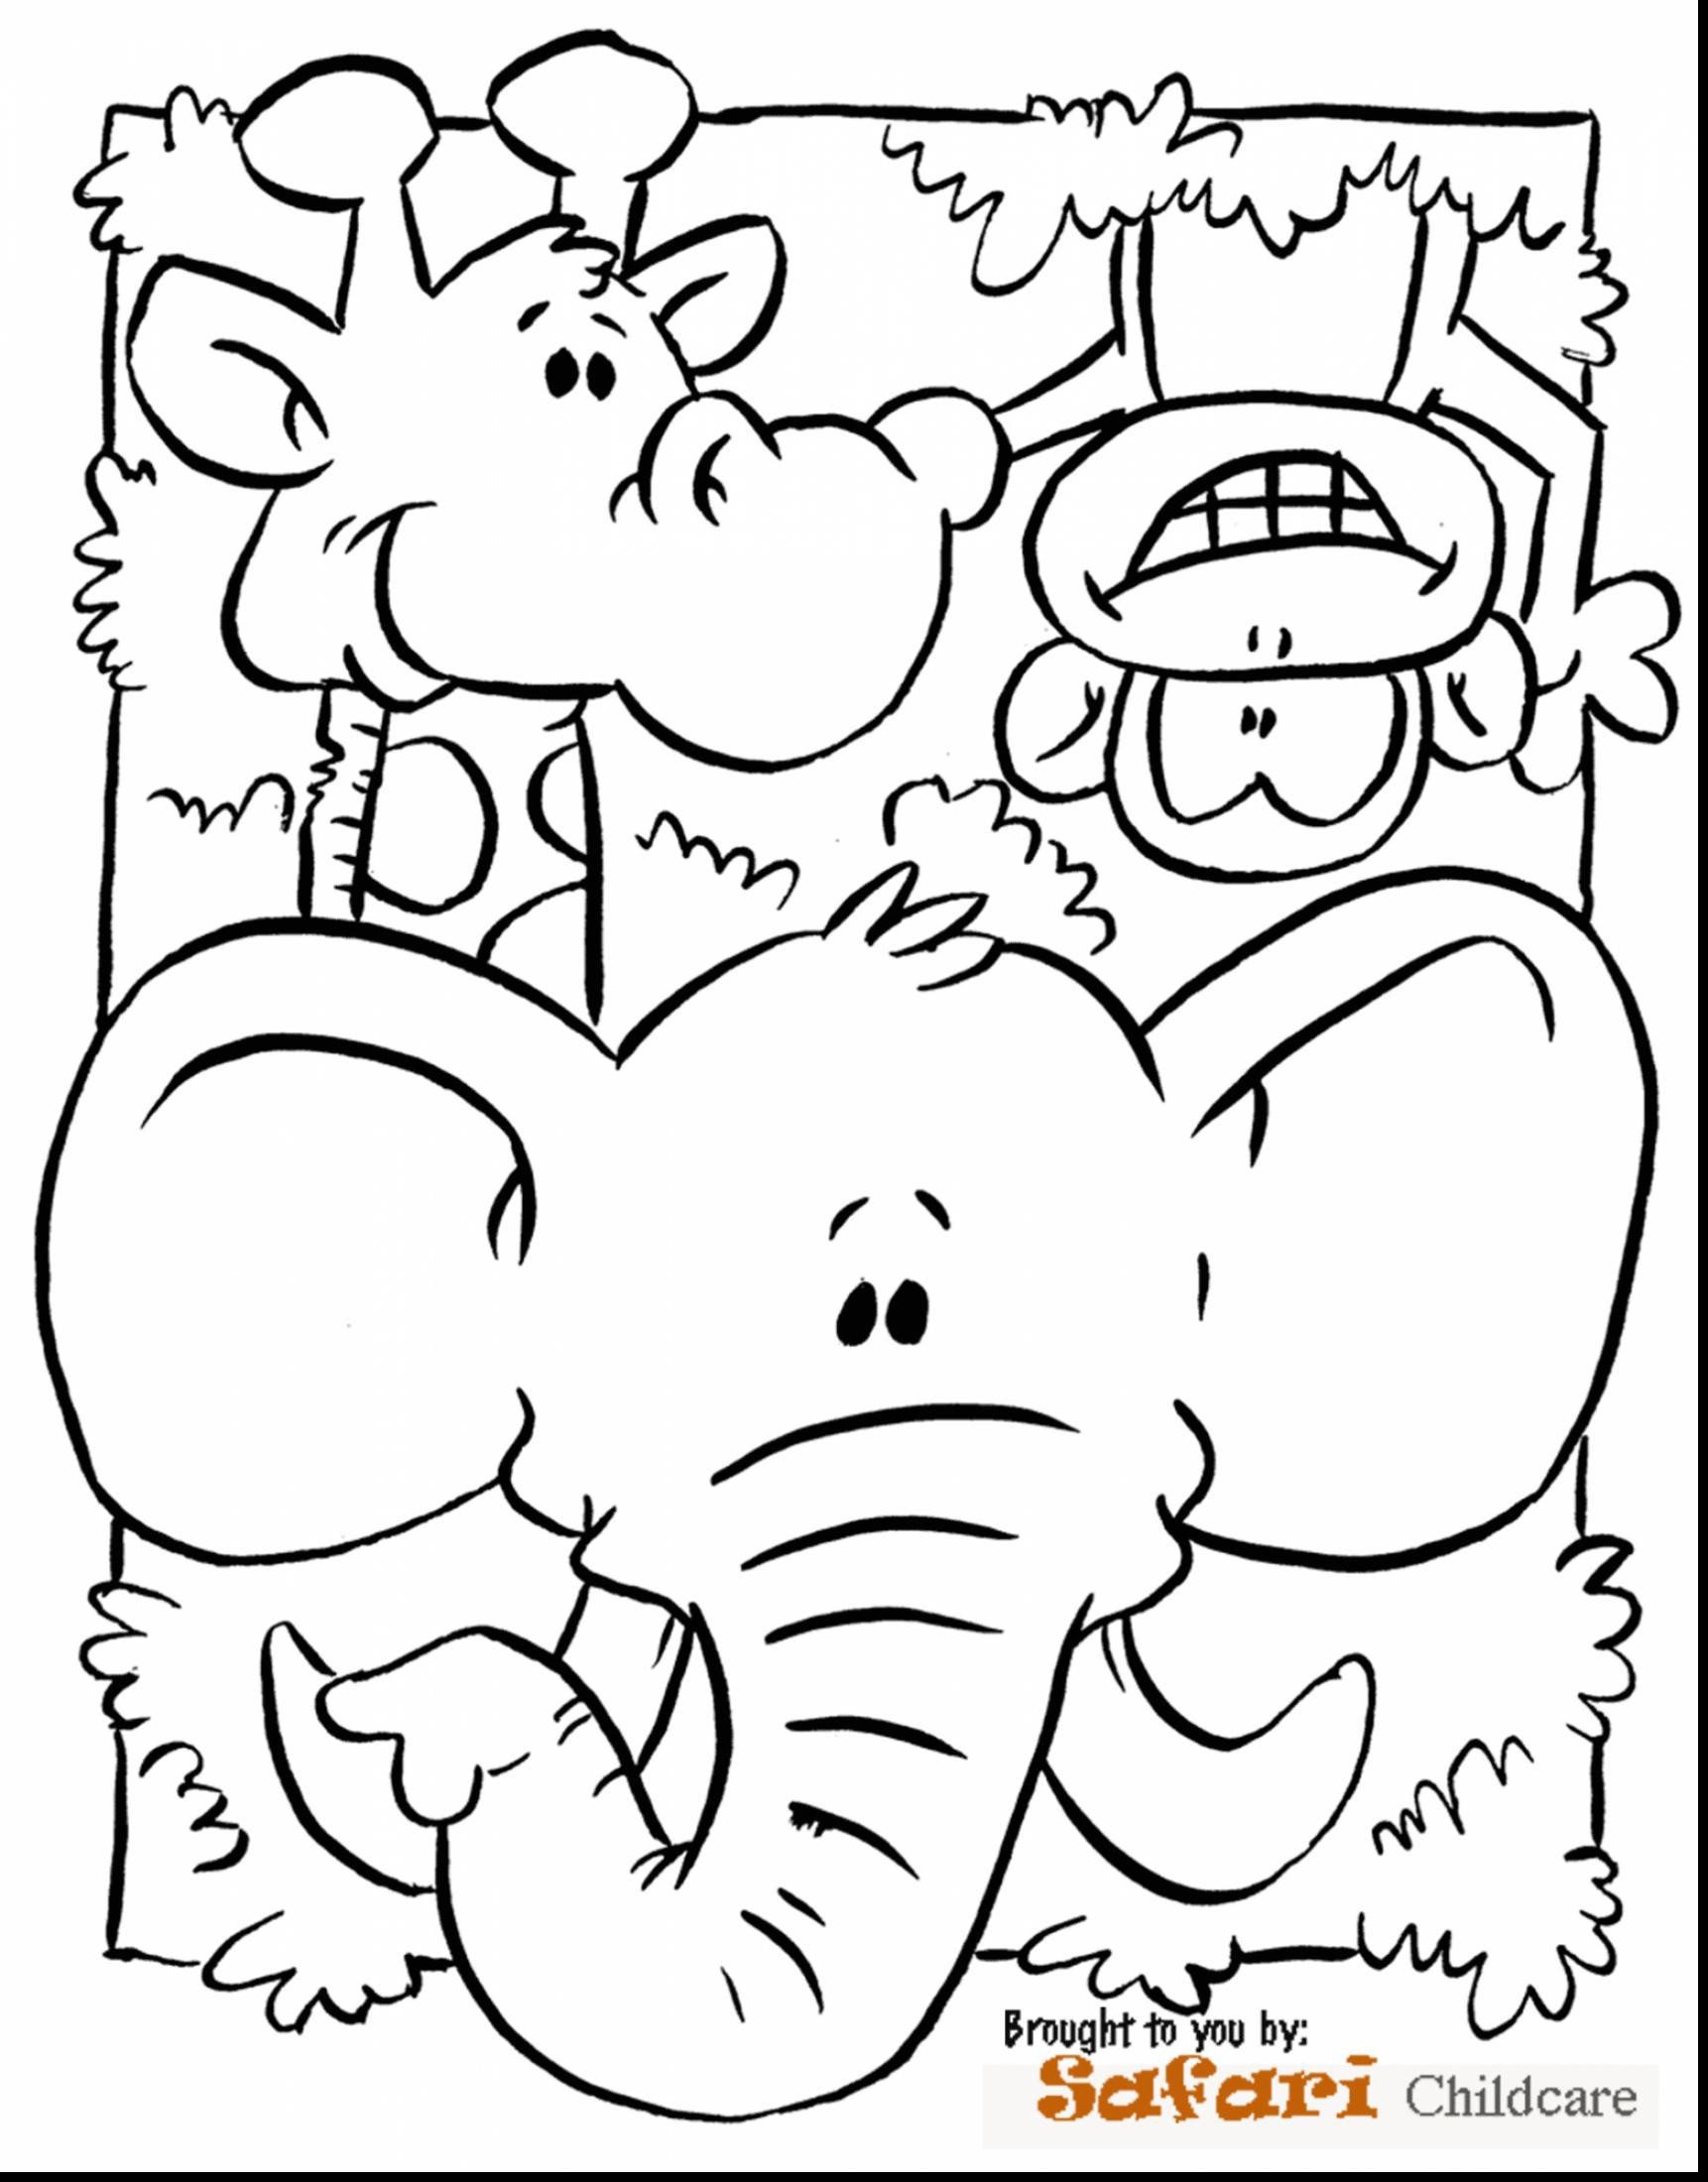 free coloring pages Rainforest Coloring Pages 5113 Gallery Animals Throughout Color of Rainforest